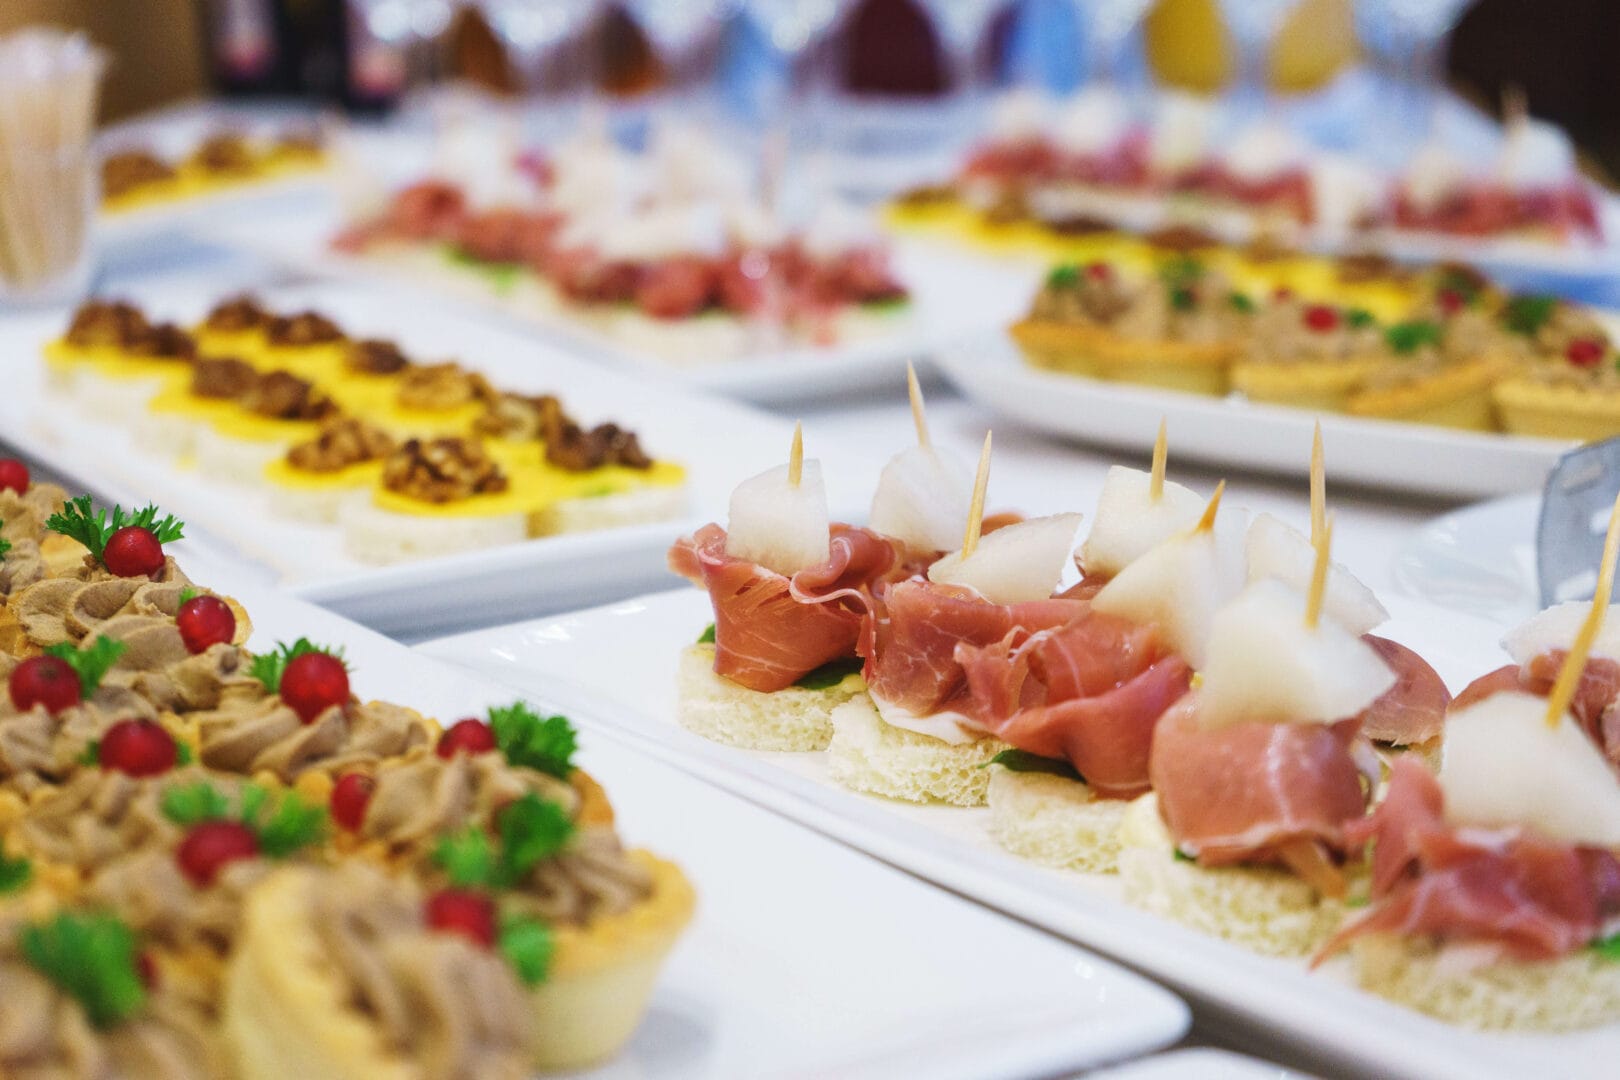 The classic Spanish tapas ham and melon. Food delivery service and catering meals on the table during the event. Soft focus.